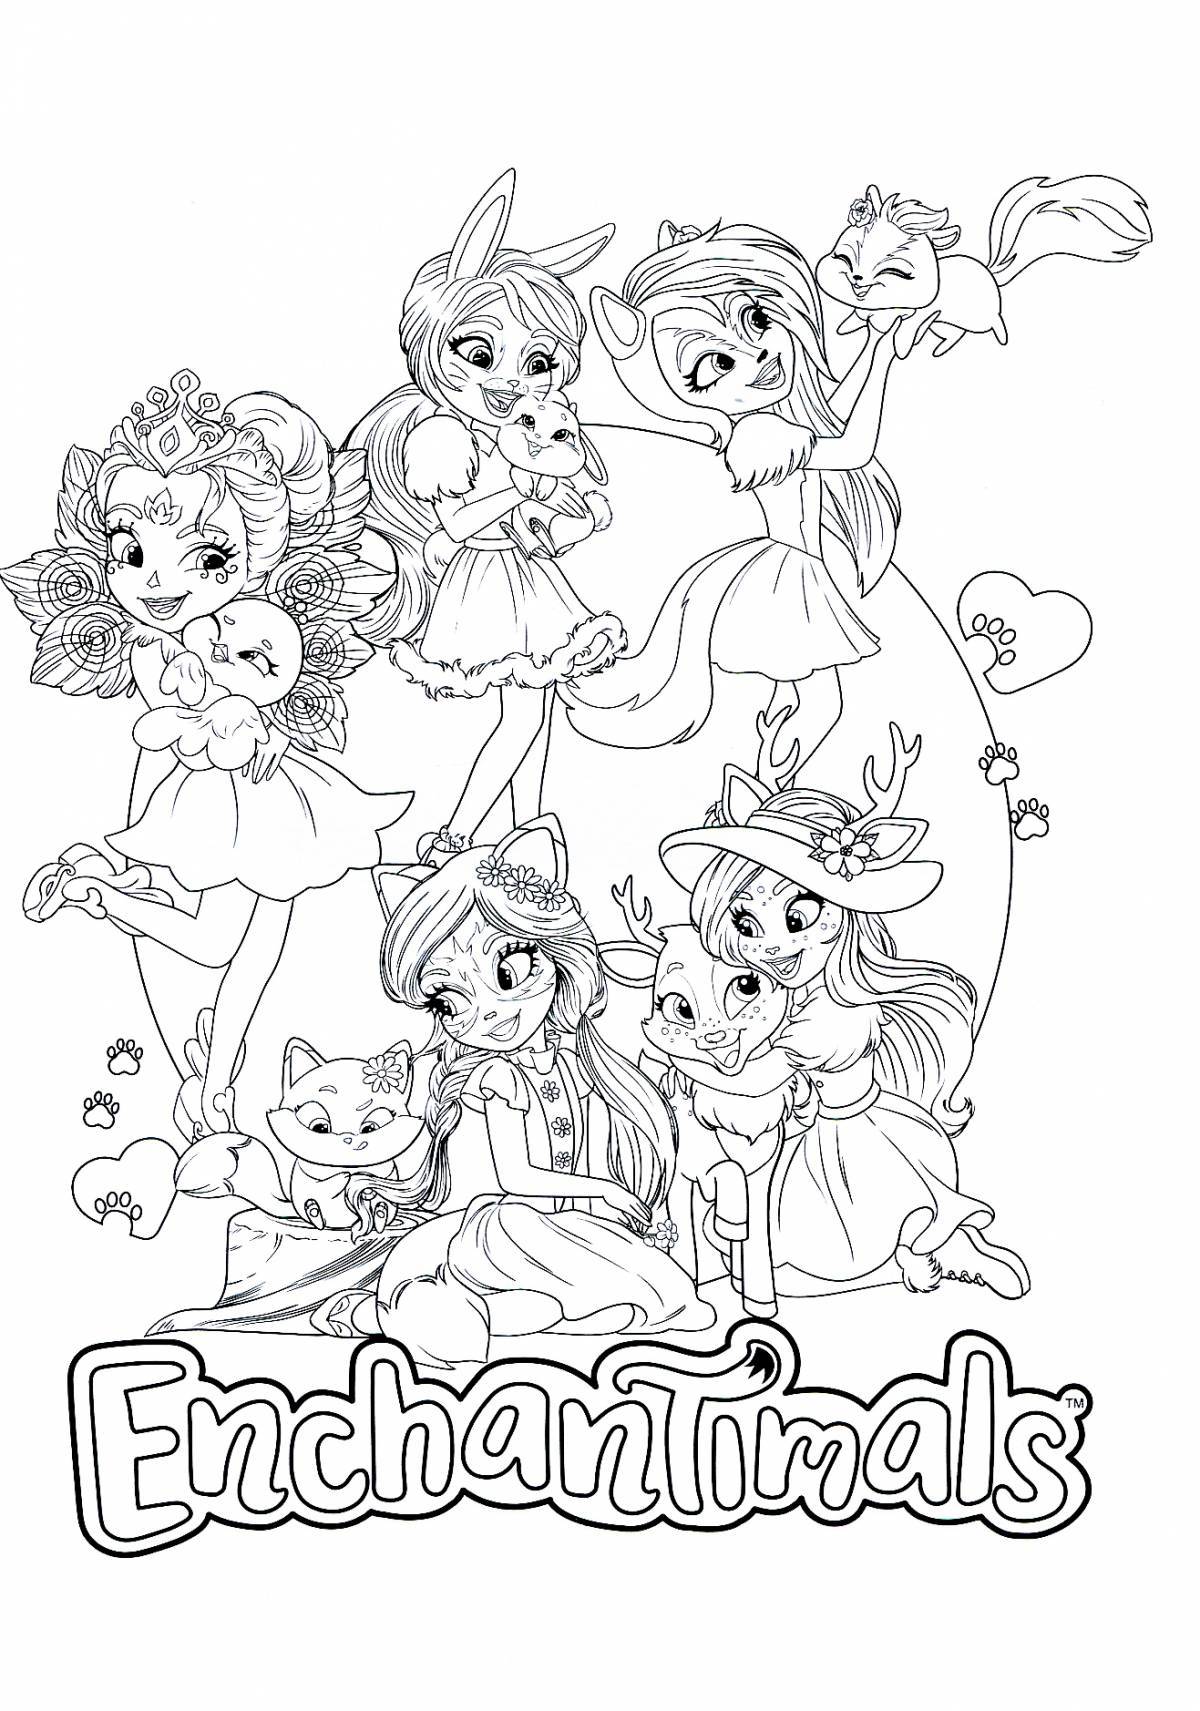 Cute enchantimals coloring pages for kids